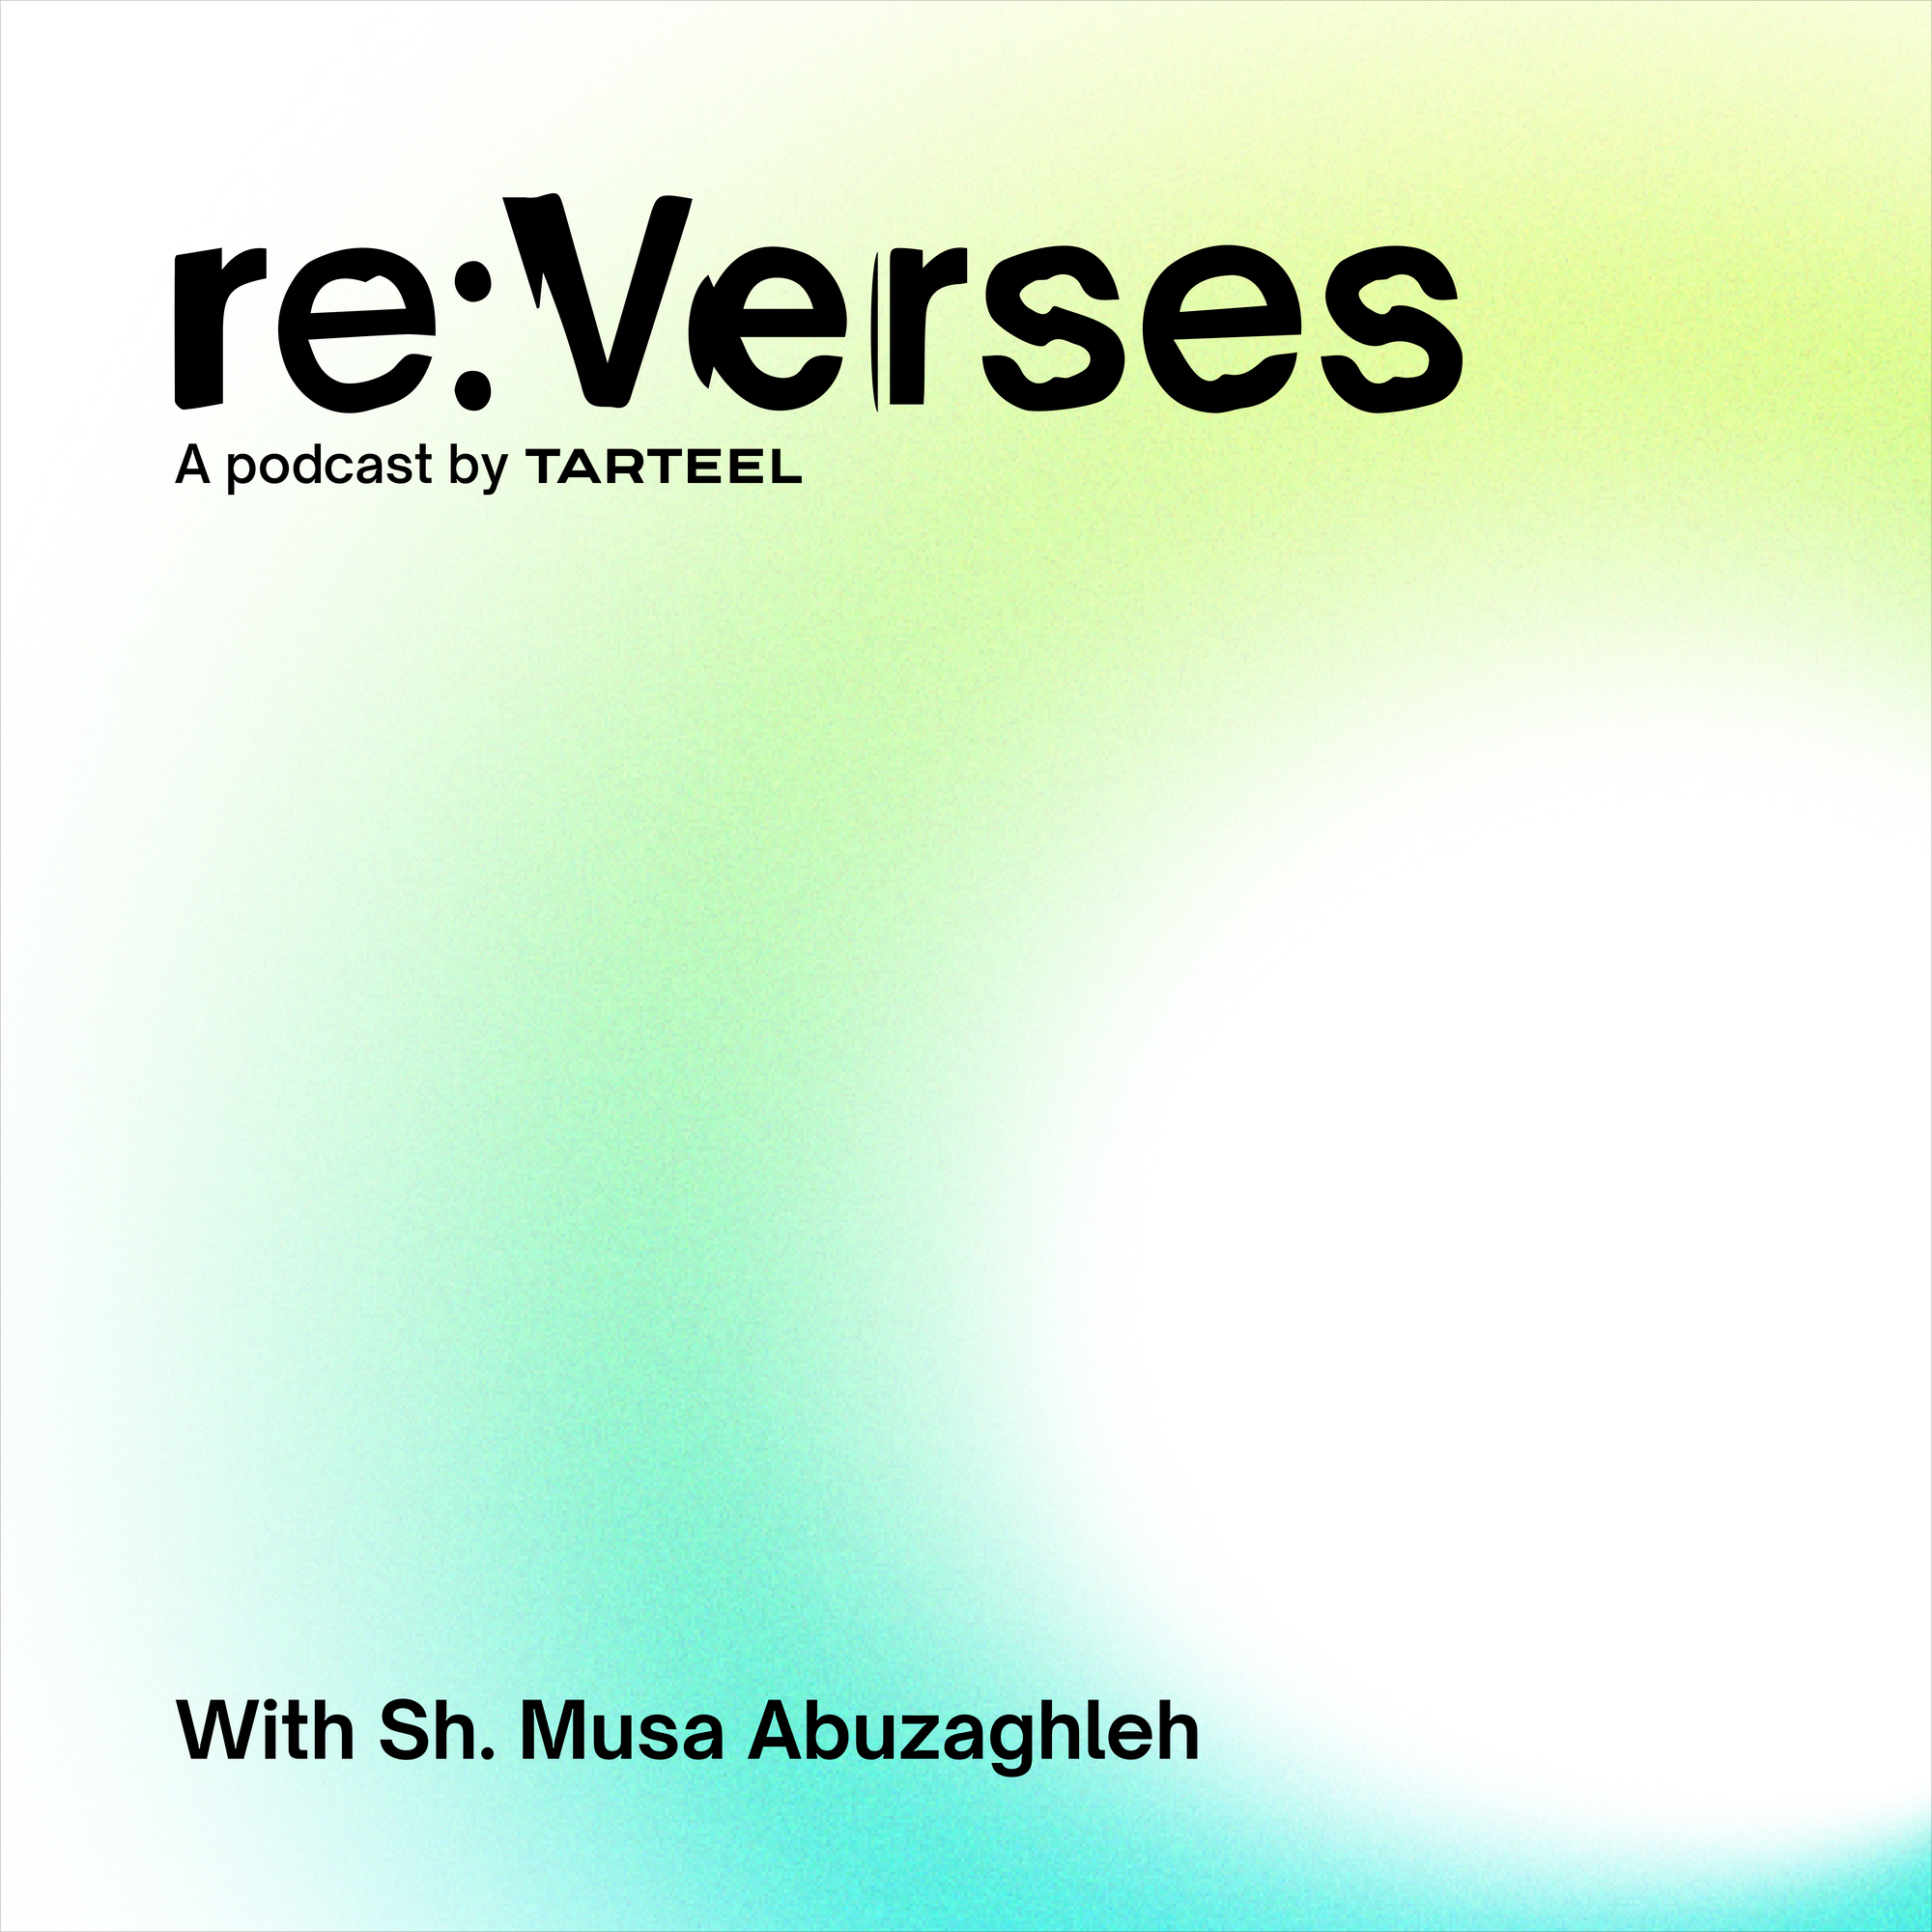 The re:Verses podcast logo